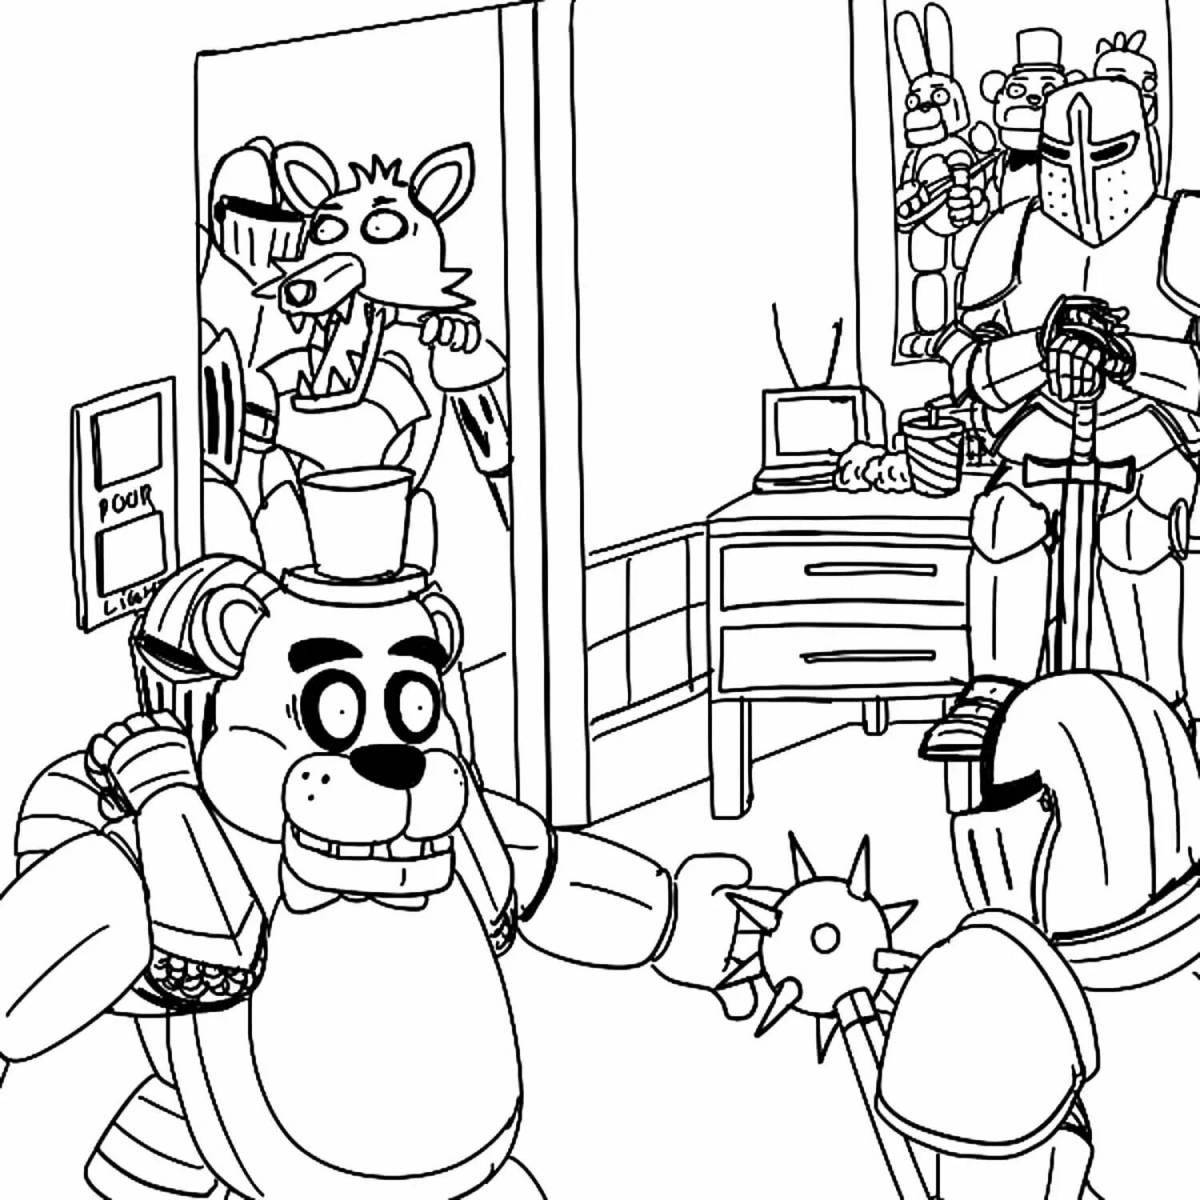 Engaging five nights at freddy's coloring page